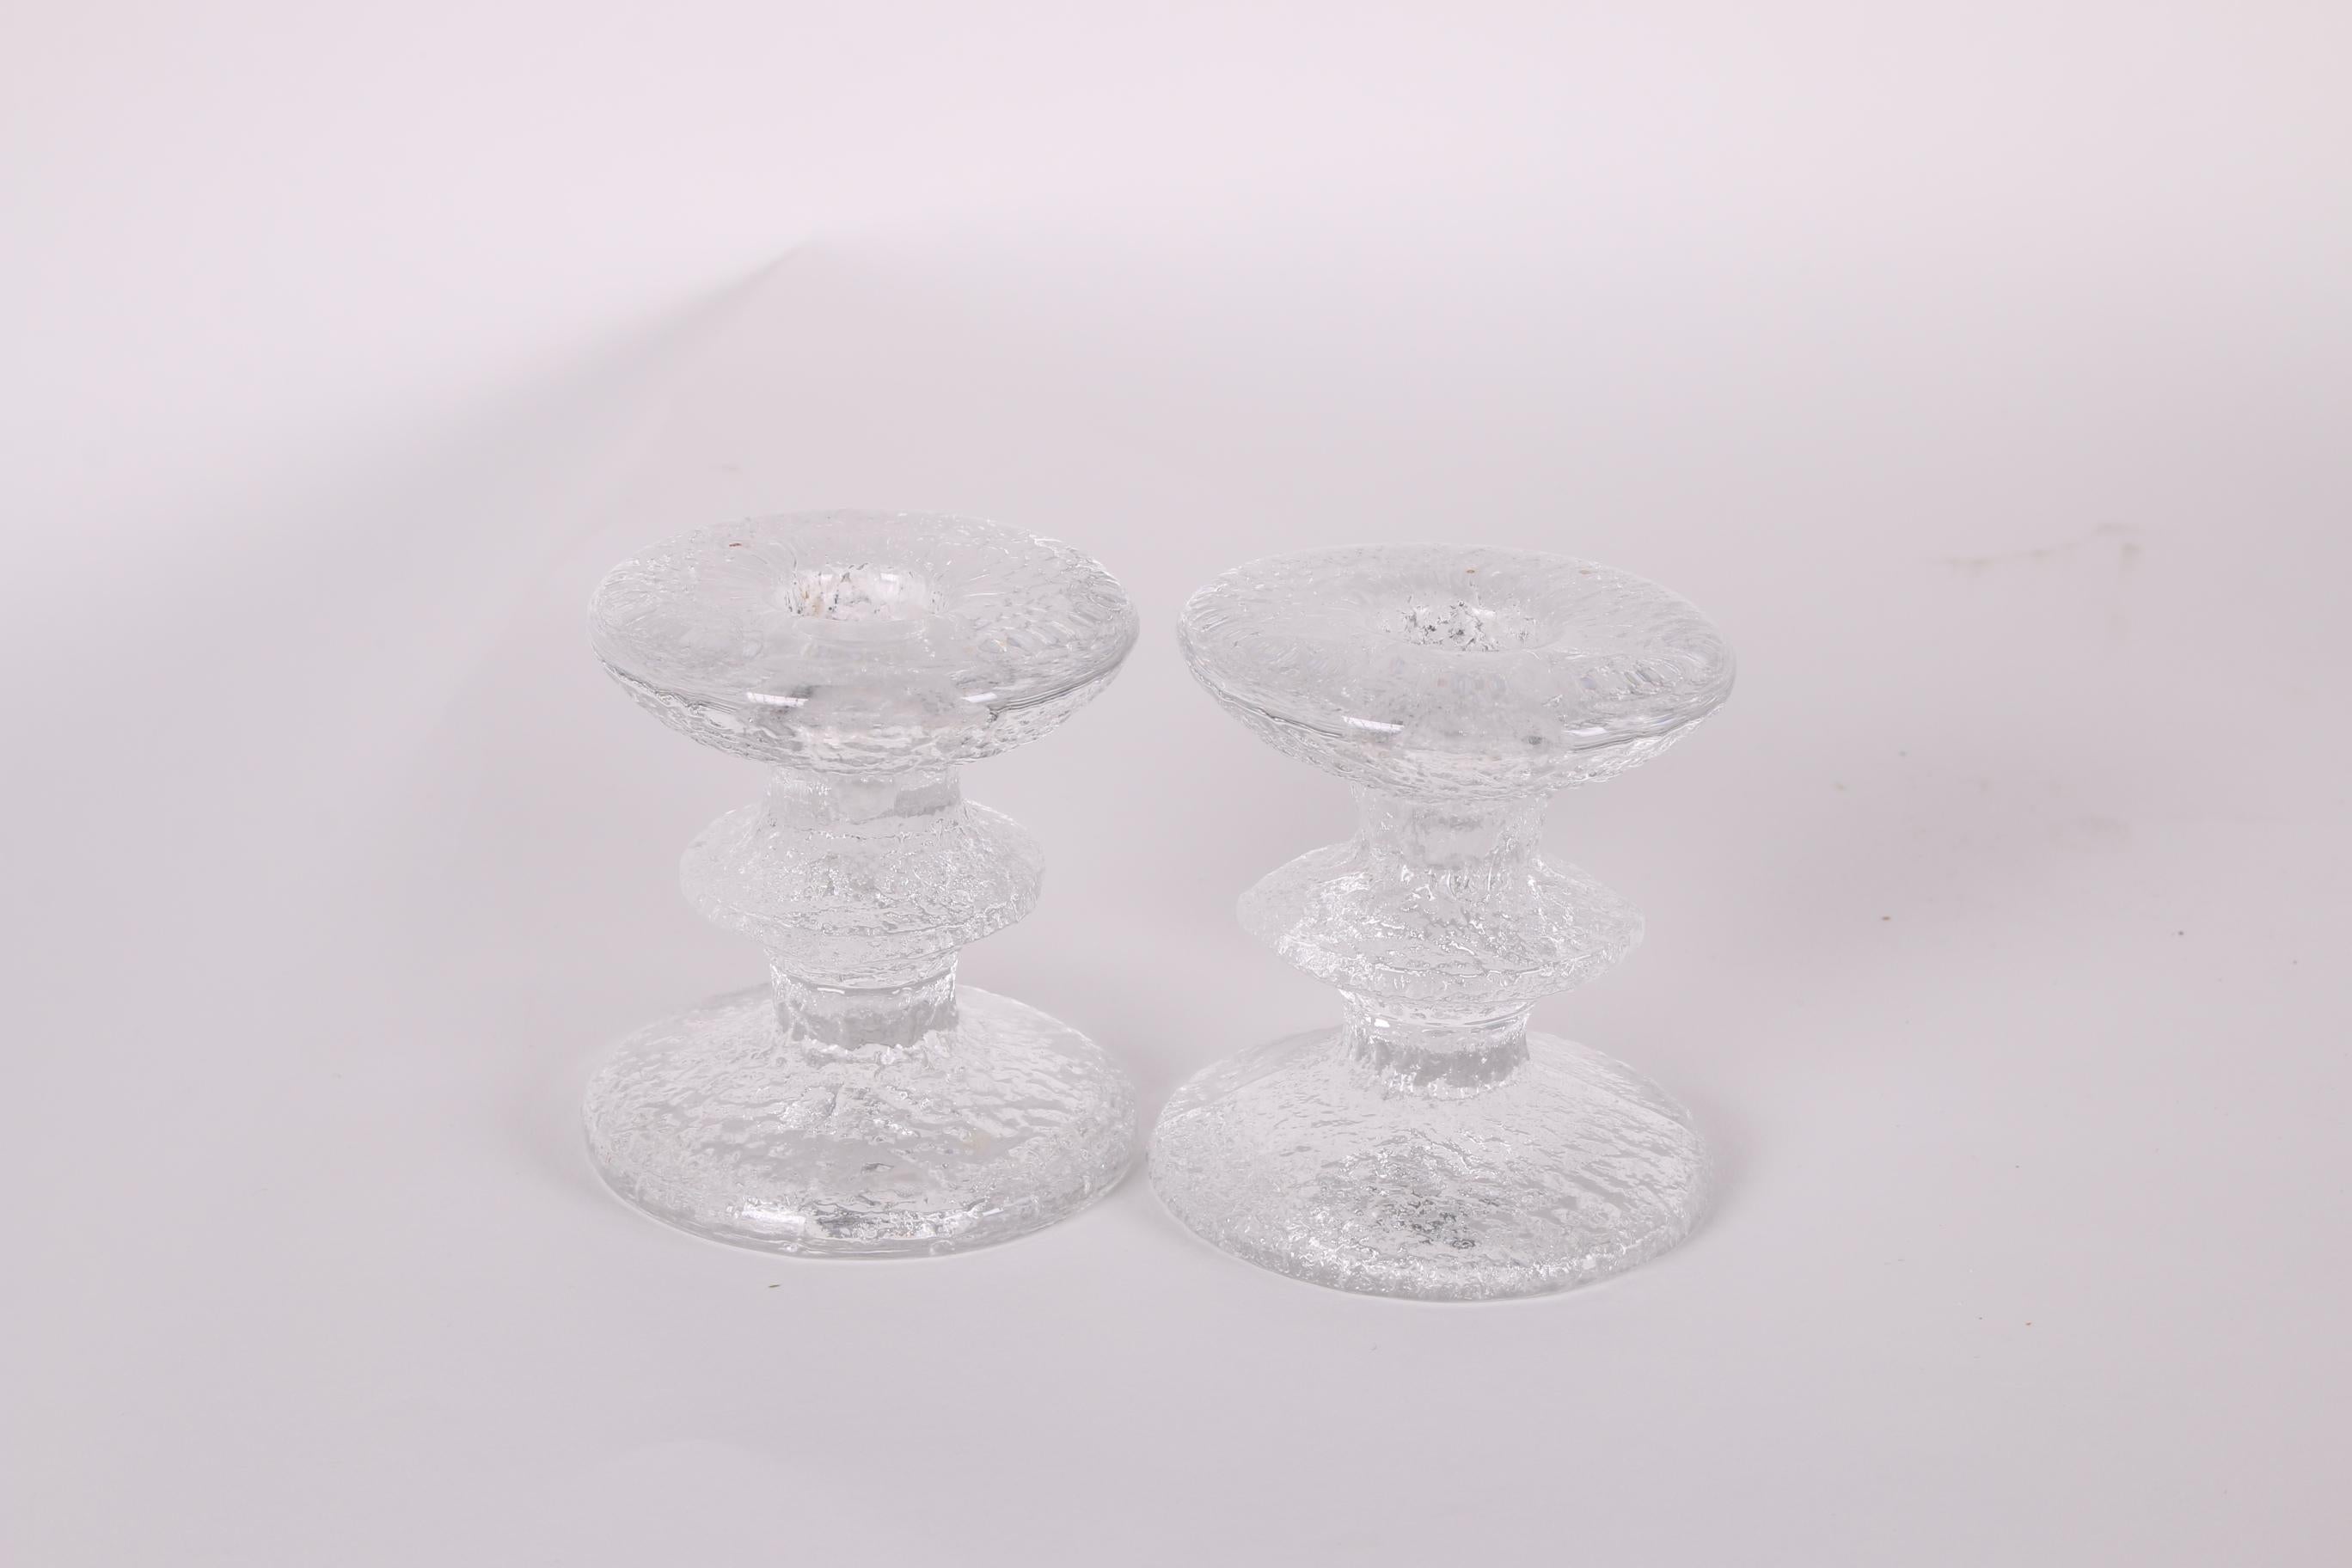 Set Littala Festivo candlesticks design by Timo Sarpaneva


A beautiful glass object from Scandinavia: signed Iittala festivo candlestick/candle holder with 1 ring design by Timo Sarpaneva from 1966. Timo Sarpaneva (1926-2006) was one of the